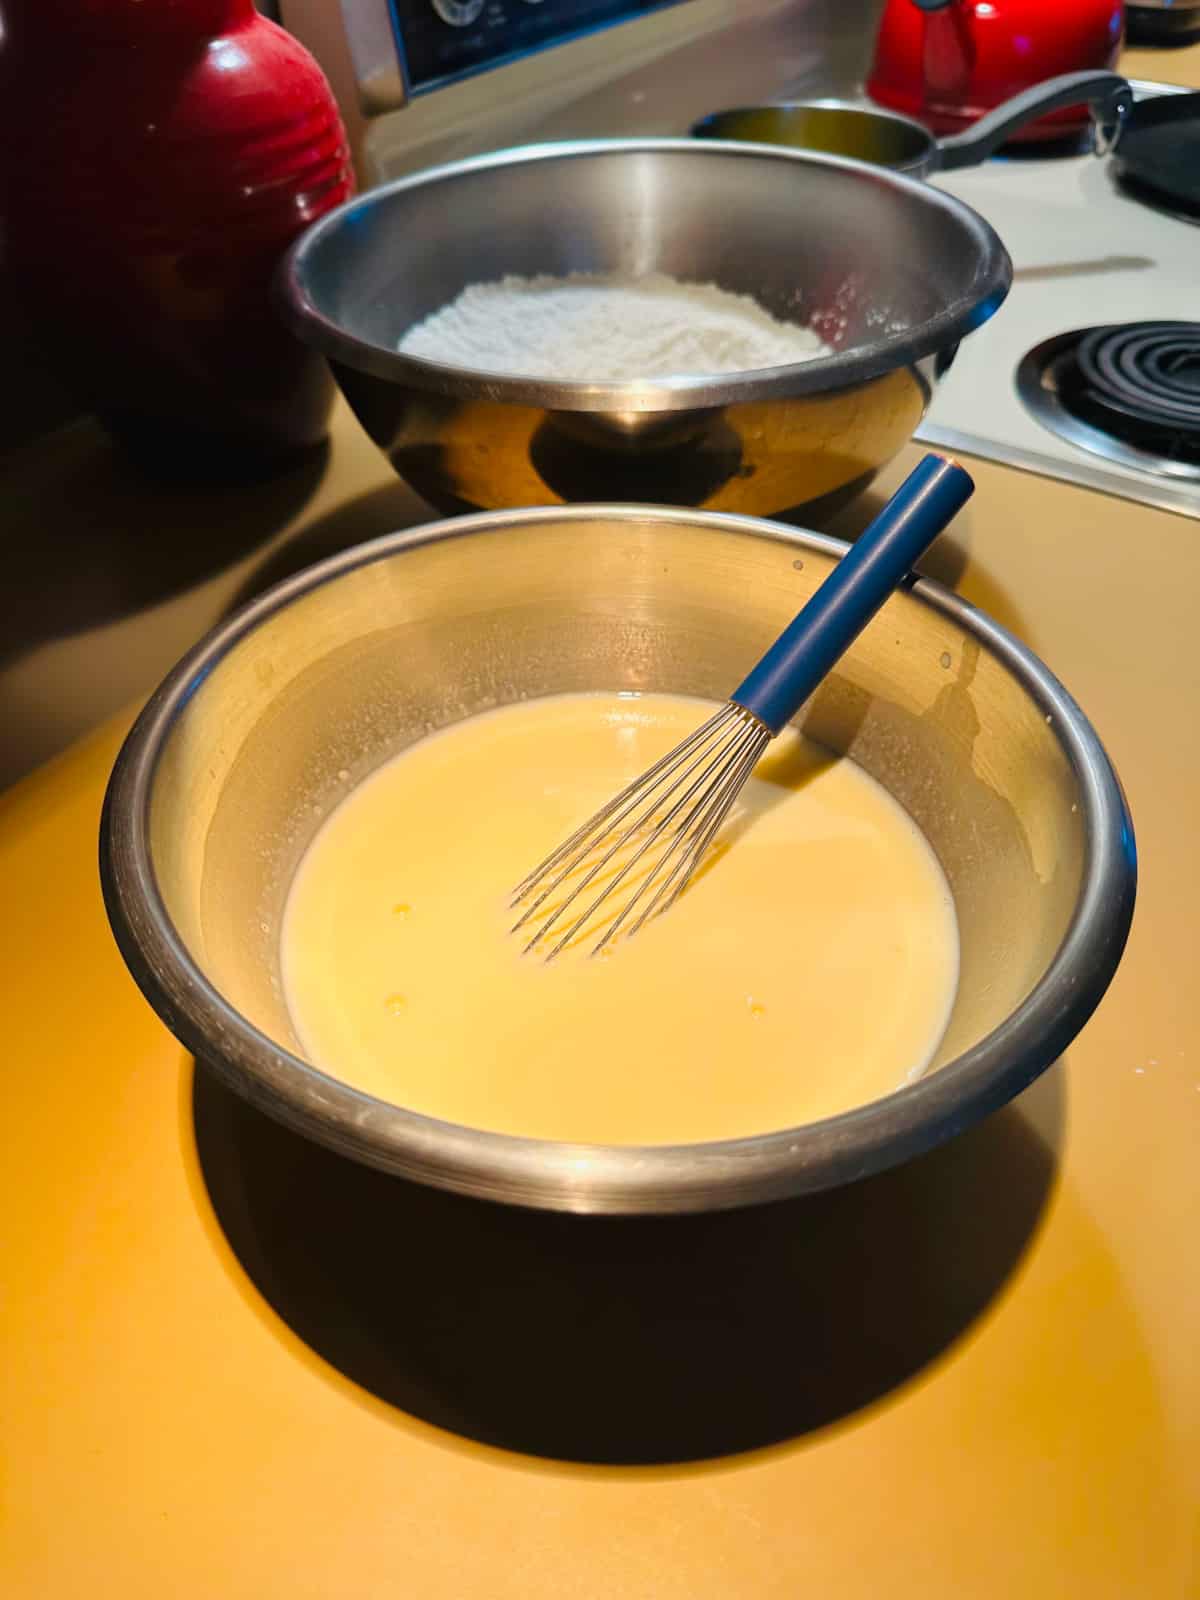 Buttermilk and eggs in a steel bowl with a whisk.